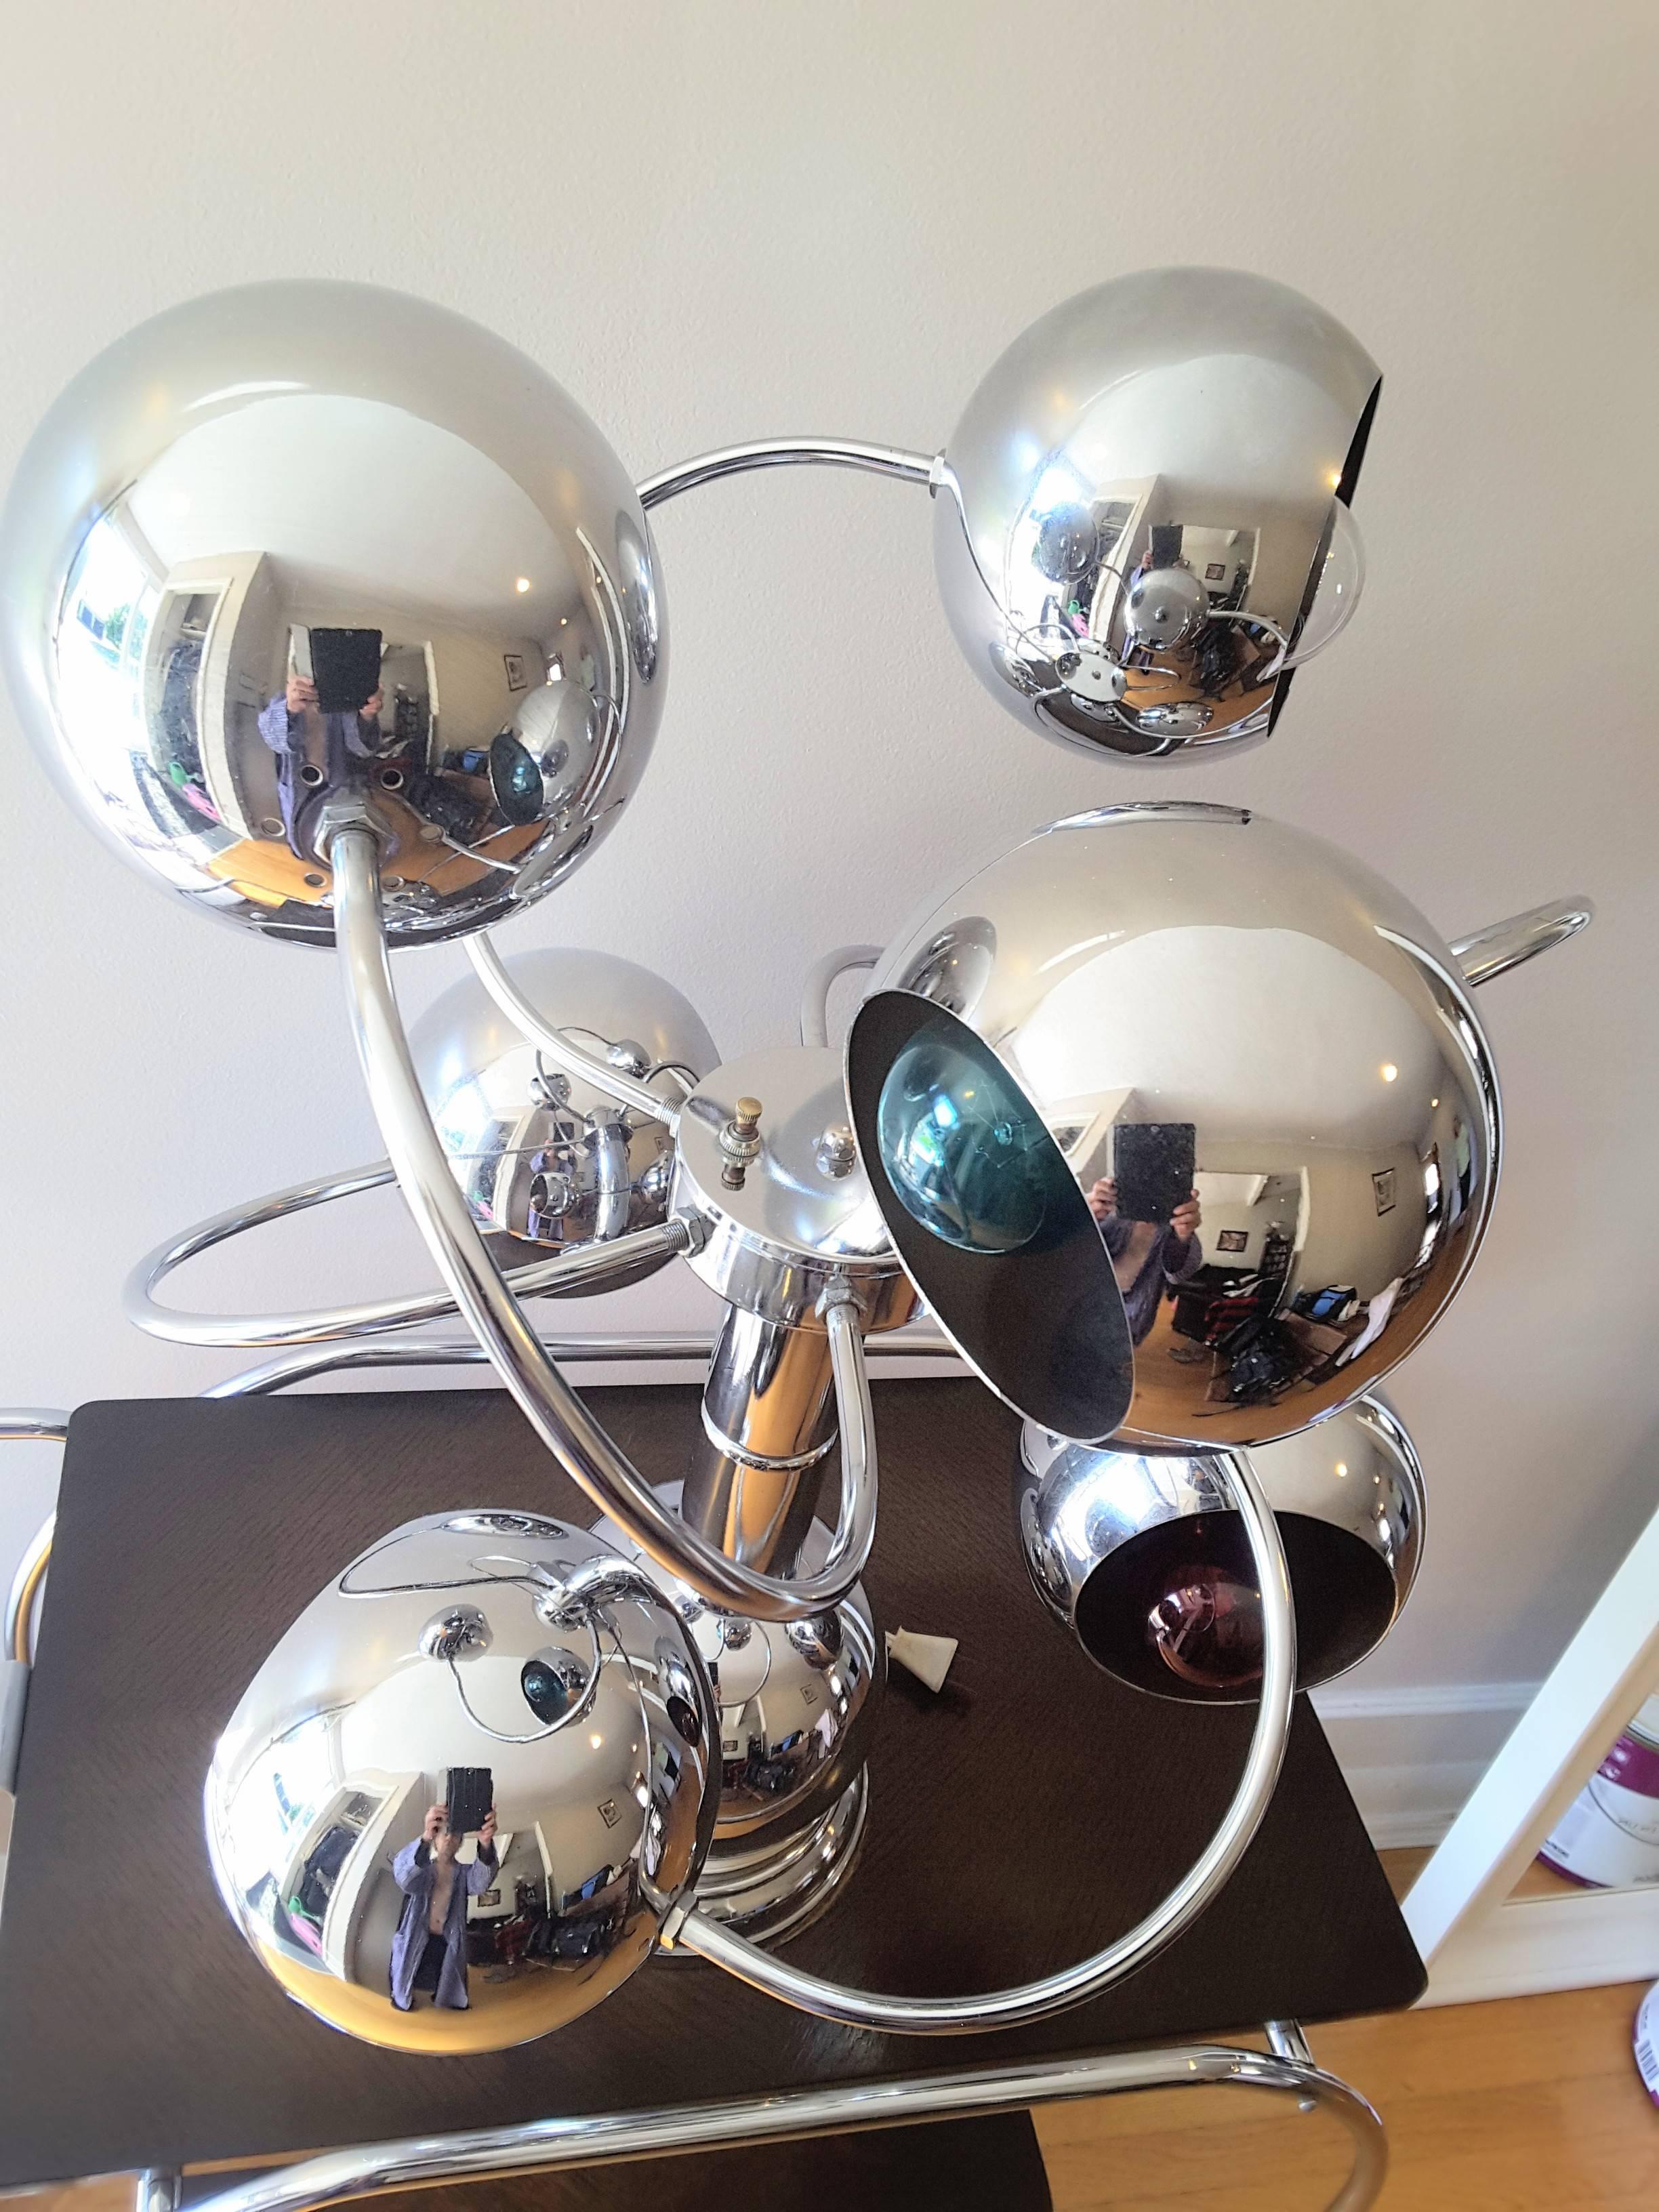 Atomic chrome six-arm table lamp, Mid-Century, late 1960s-early 1970s, chrome metal body, with six lights are in a clockwise circular pattern in a an eye ball style mount. The lamp measures 25